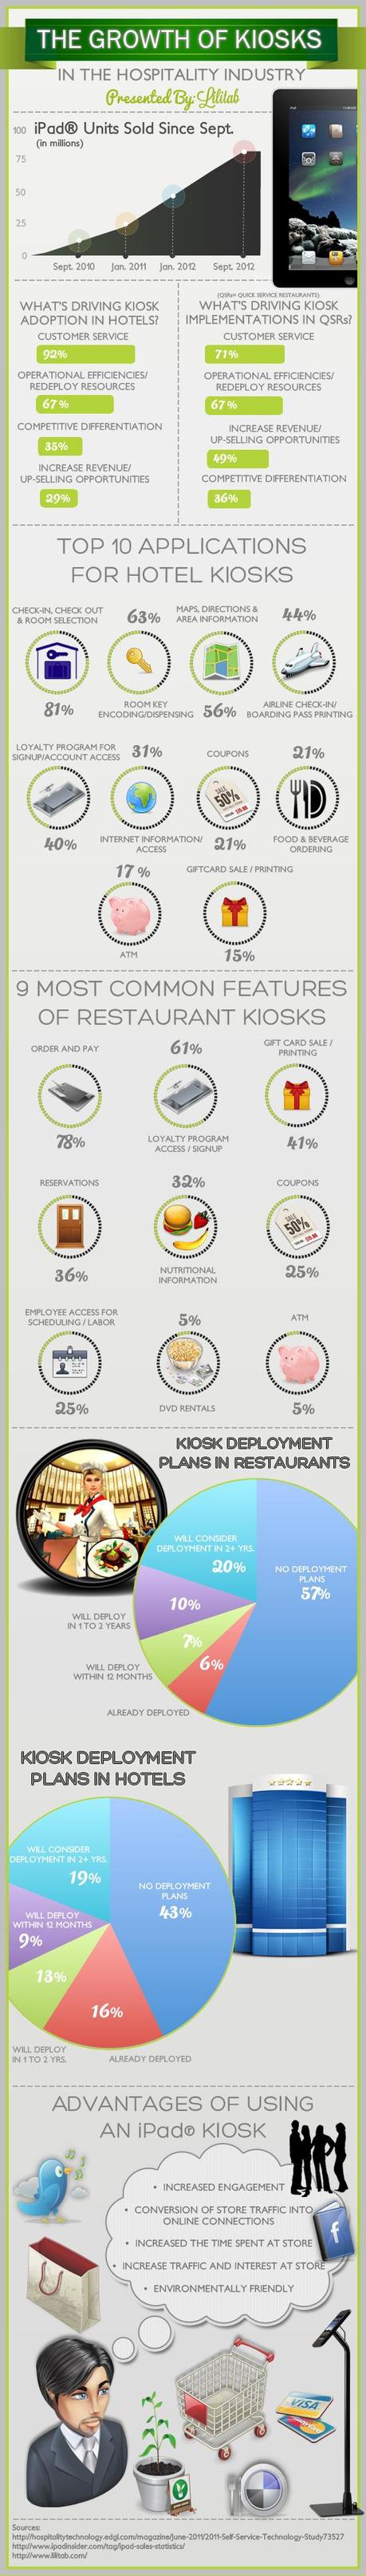 Growth of Kiosks In the Hospitality Industry Infographic